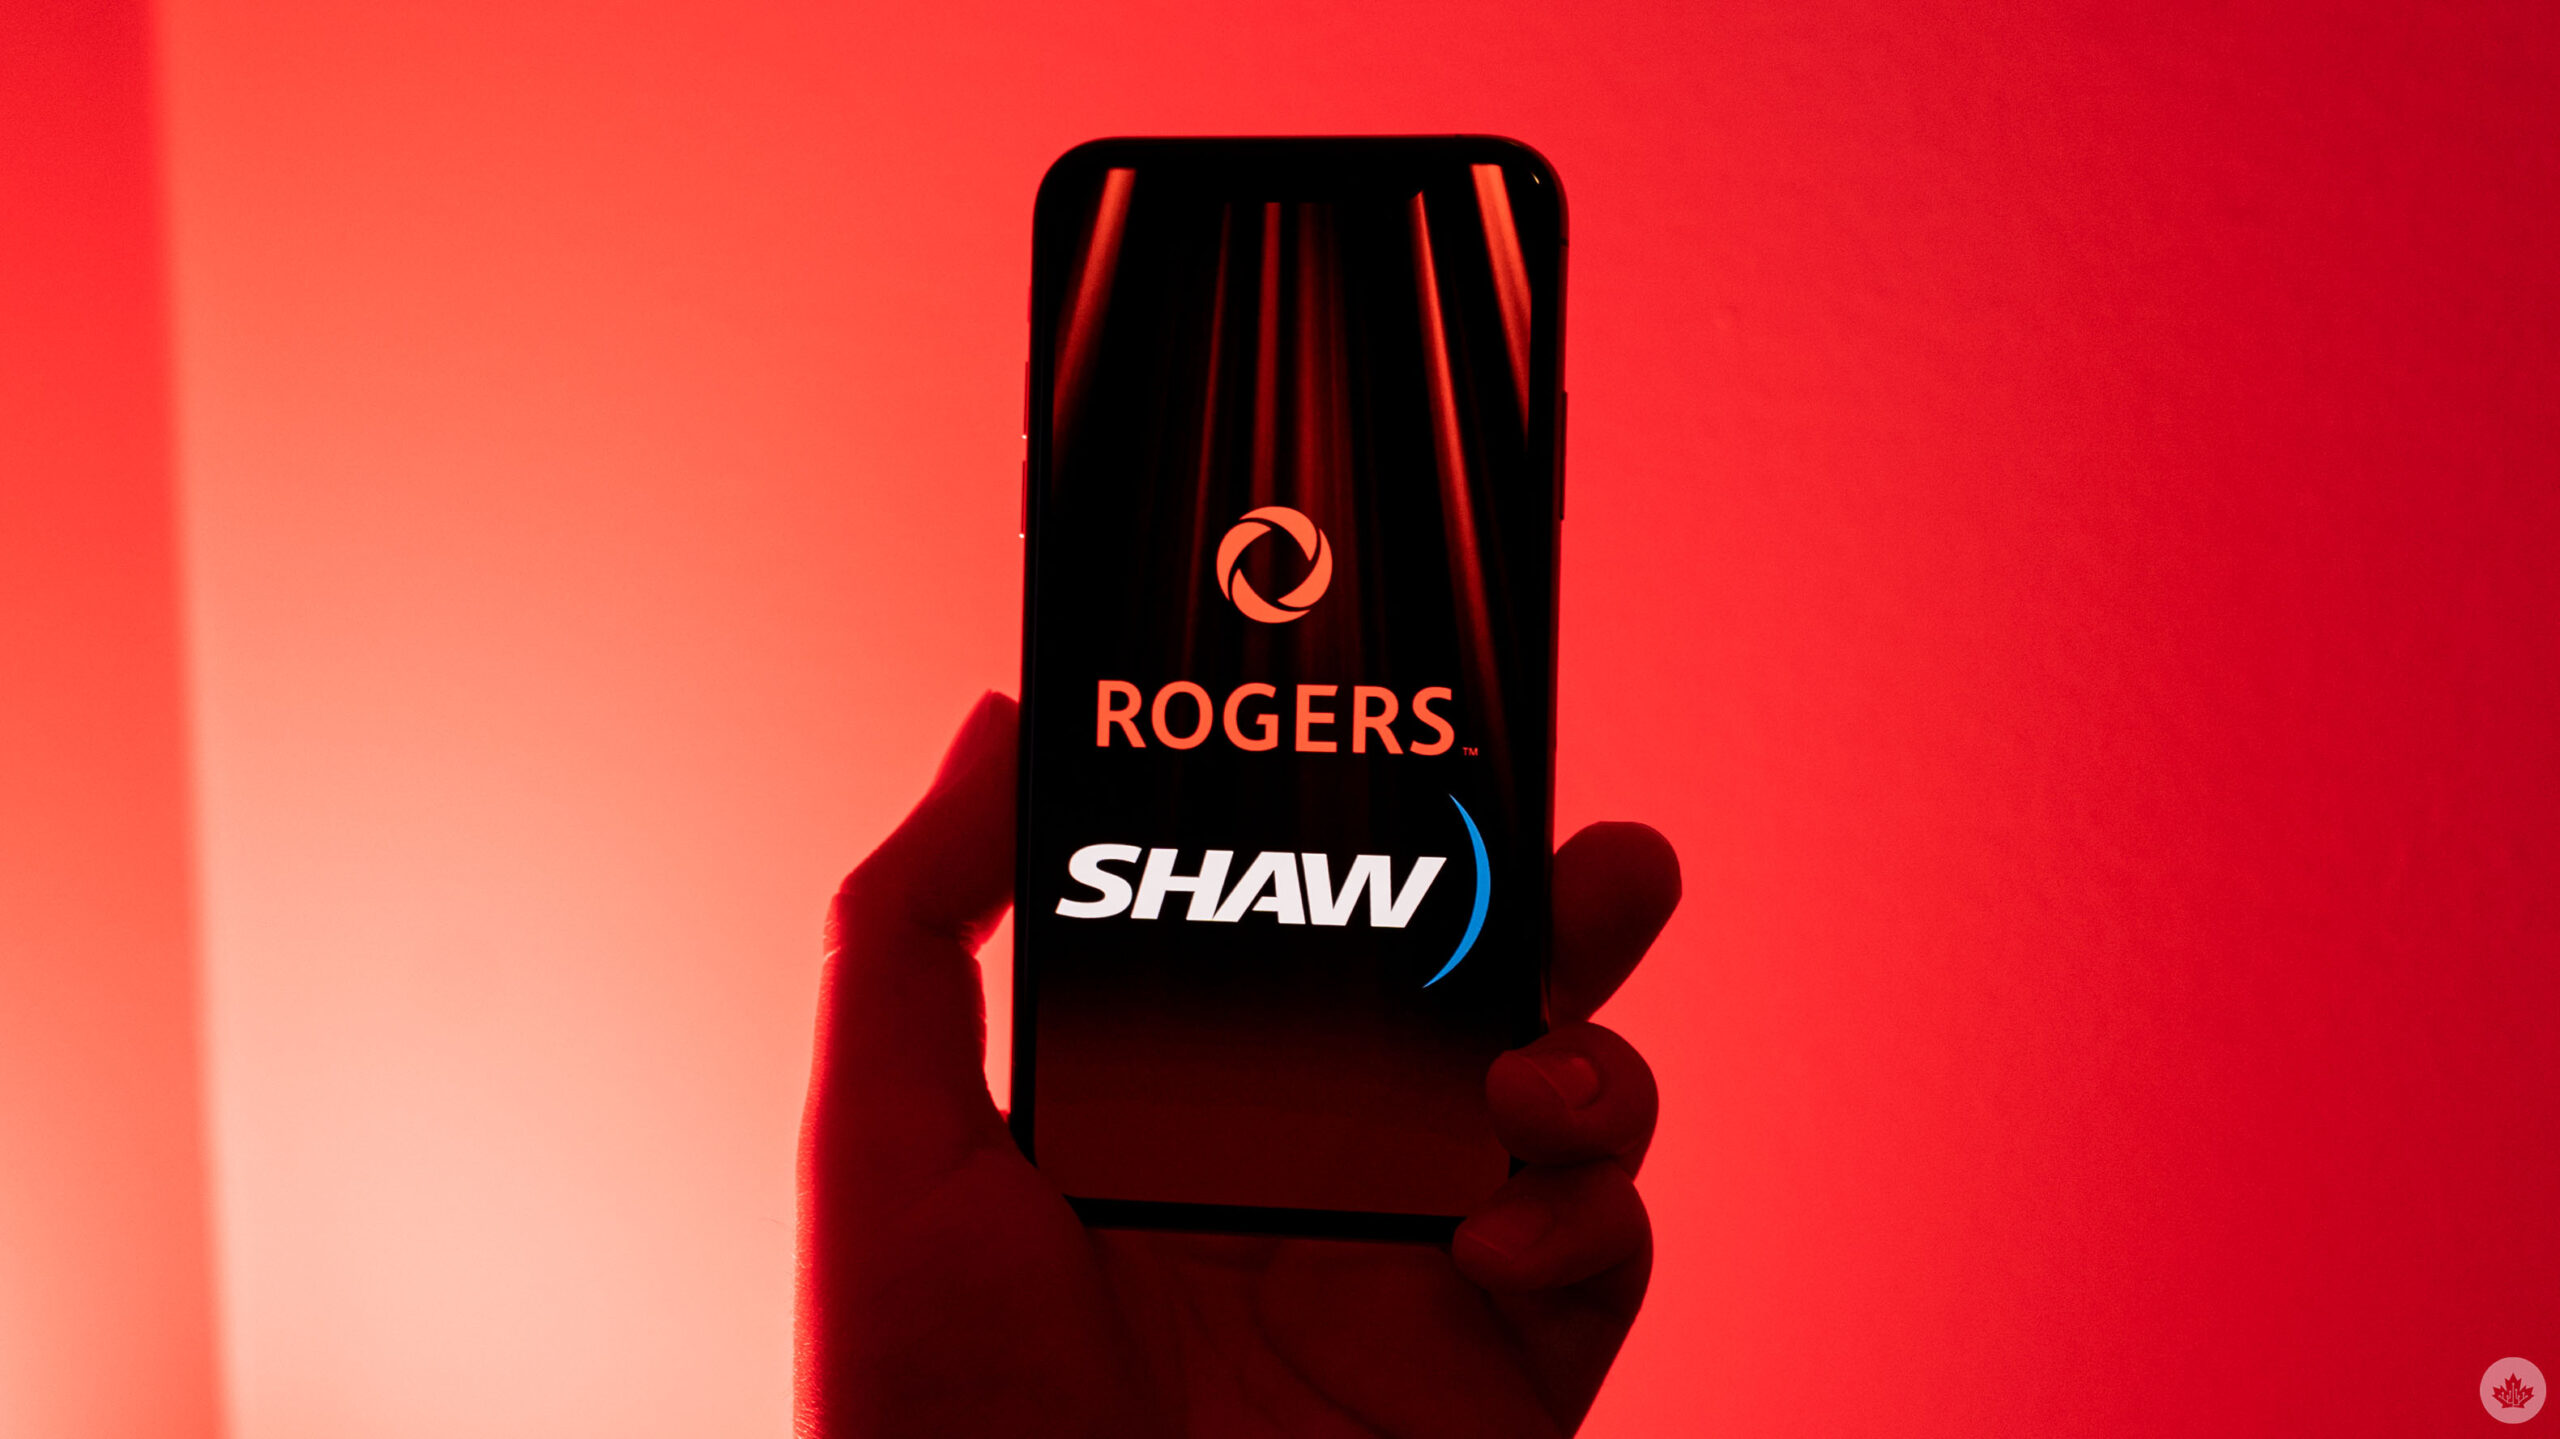 Rogers and Shaw logos on an iPhone